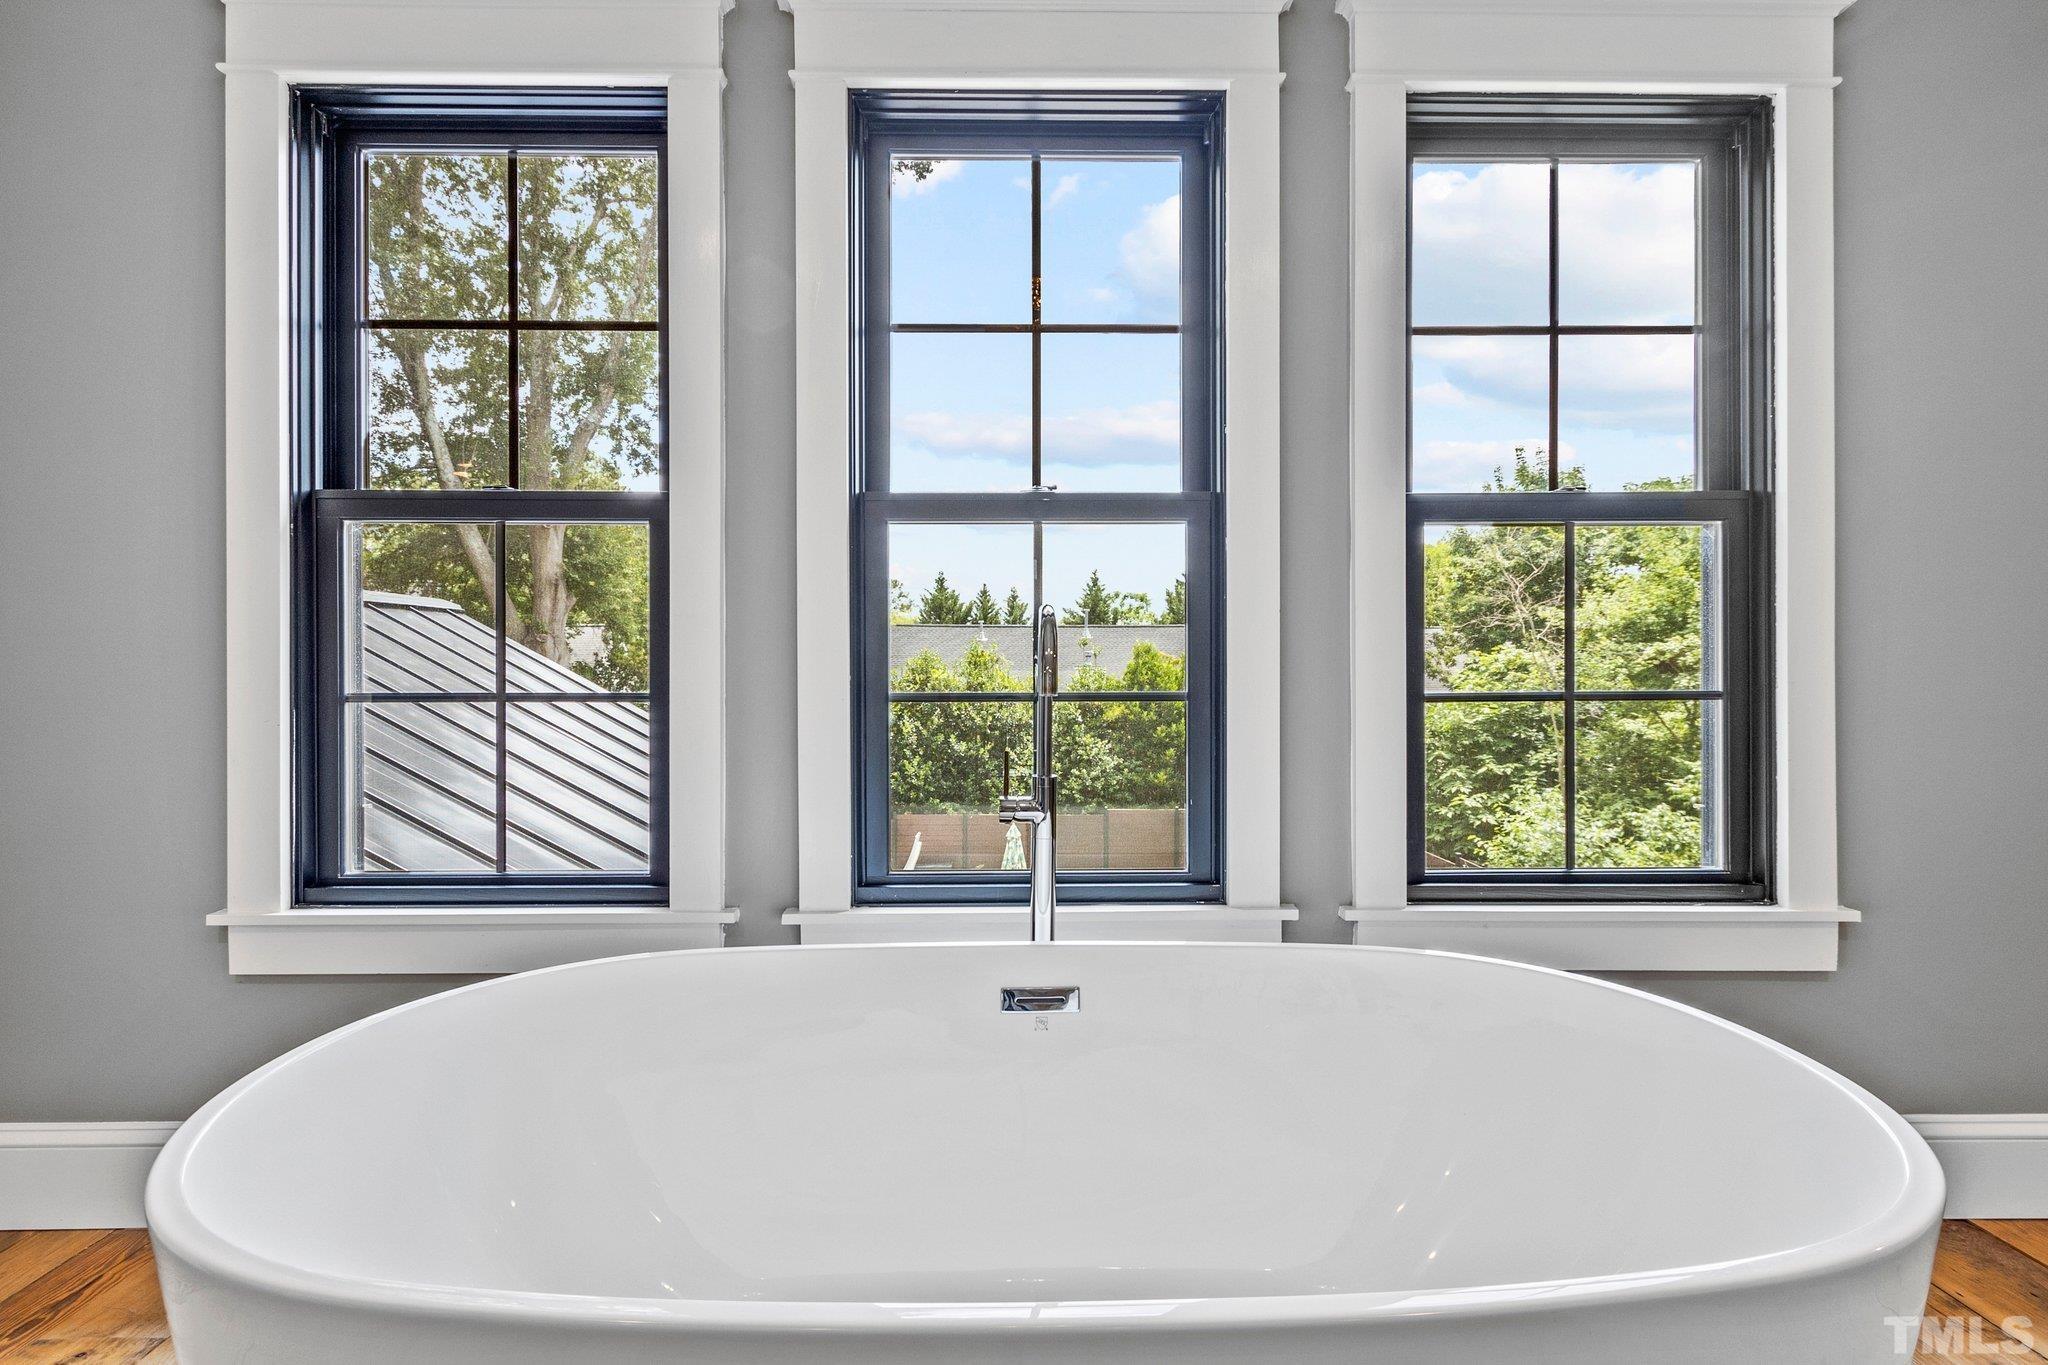 Free-standing soaker tub, flooded with natural light and green tree-top views.